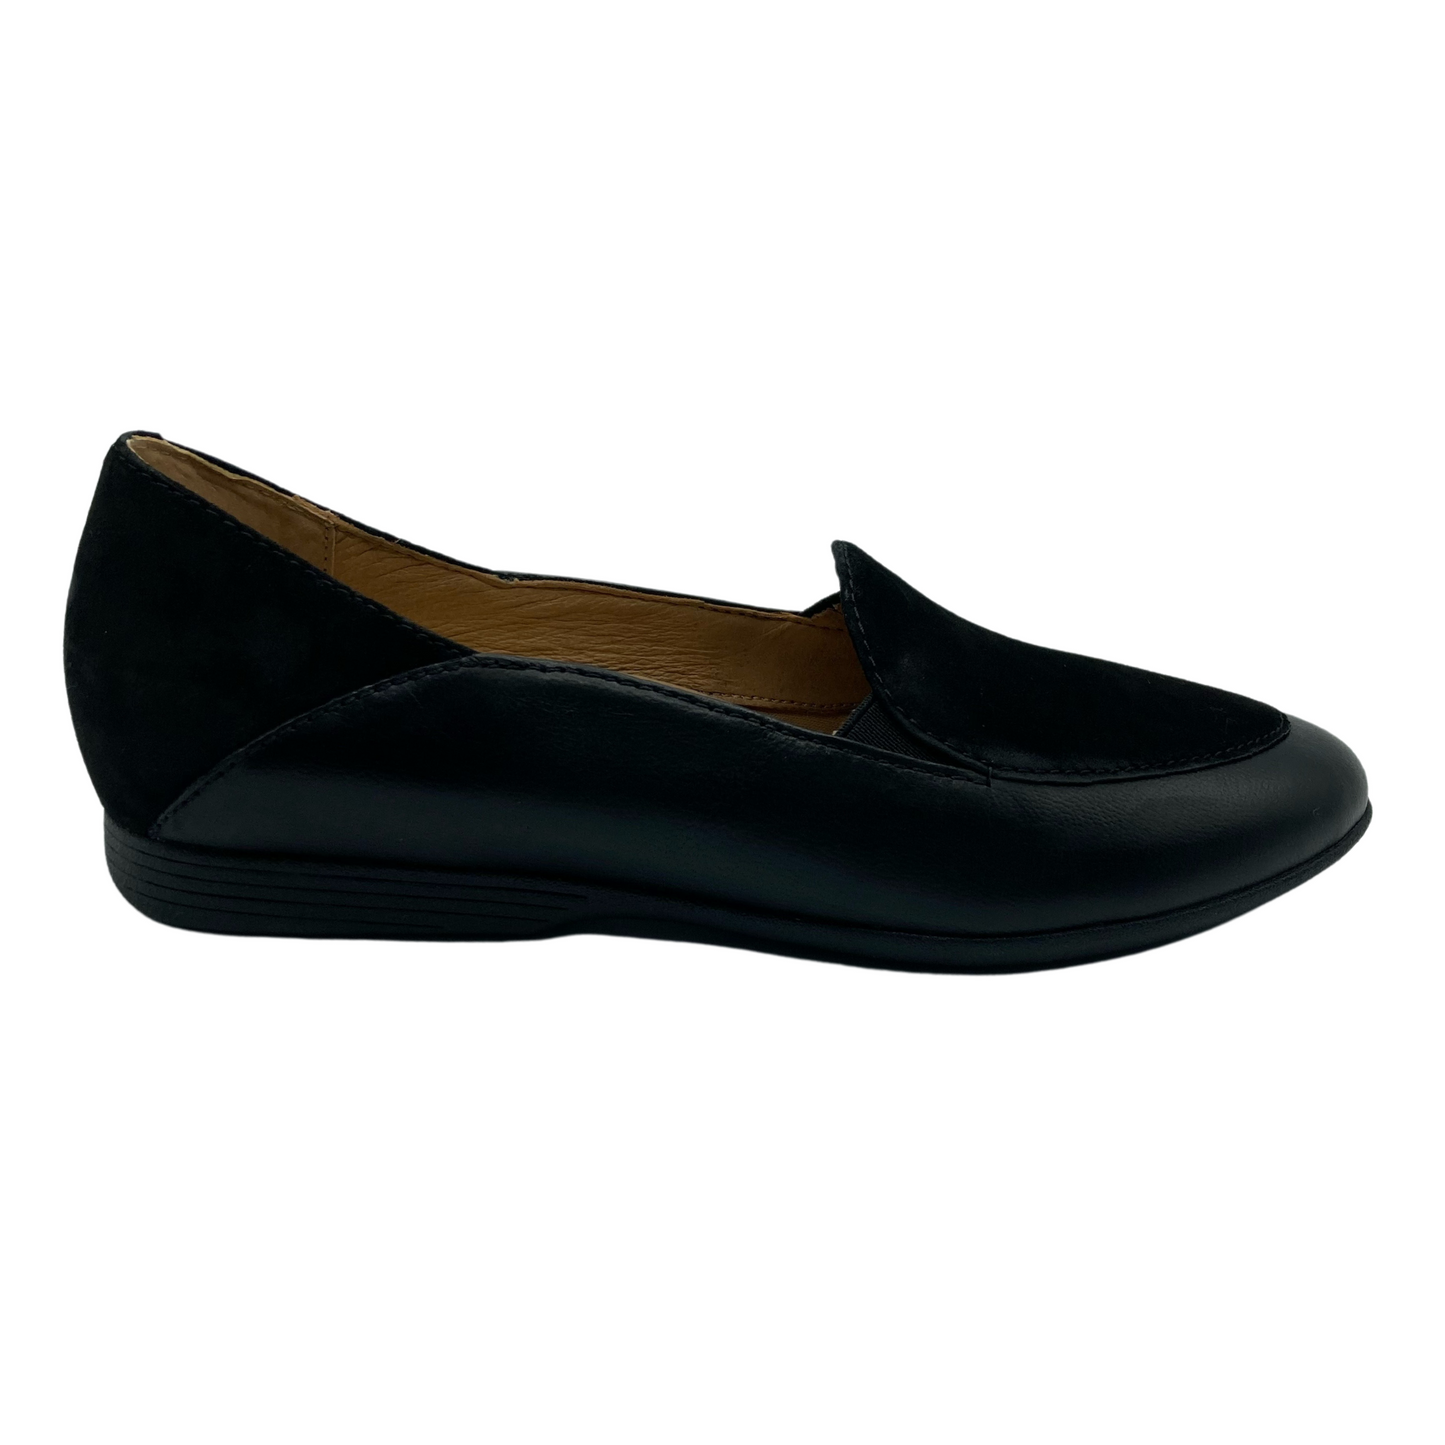 Right facing view of black leather flat with rounded toe